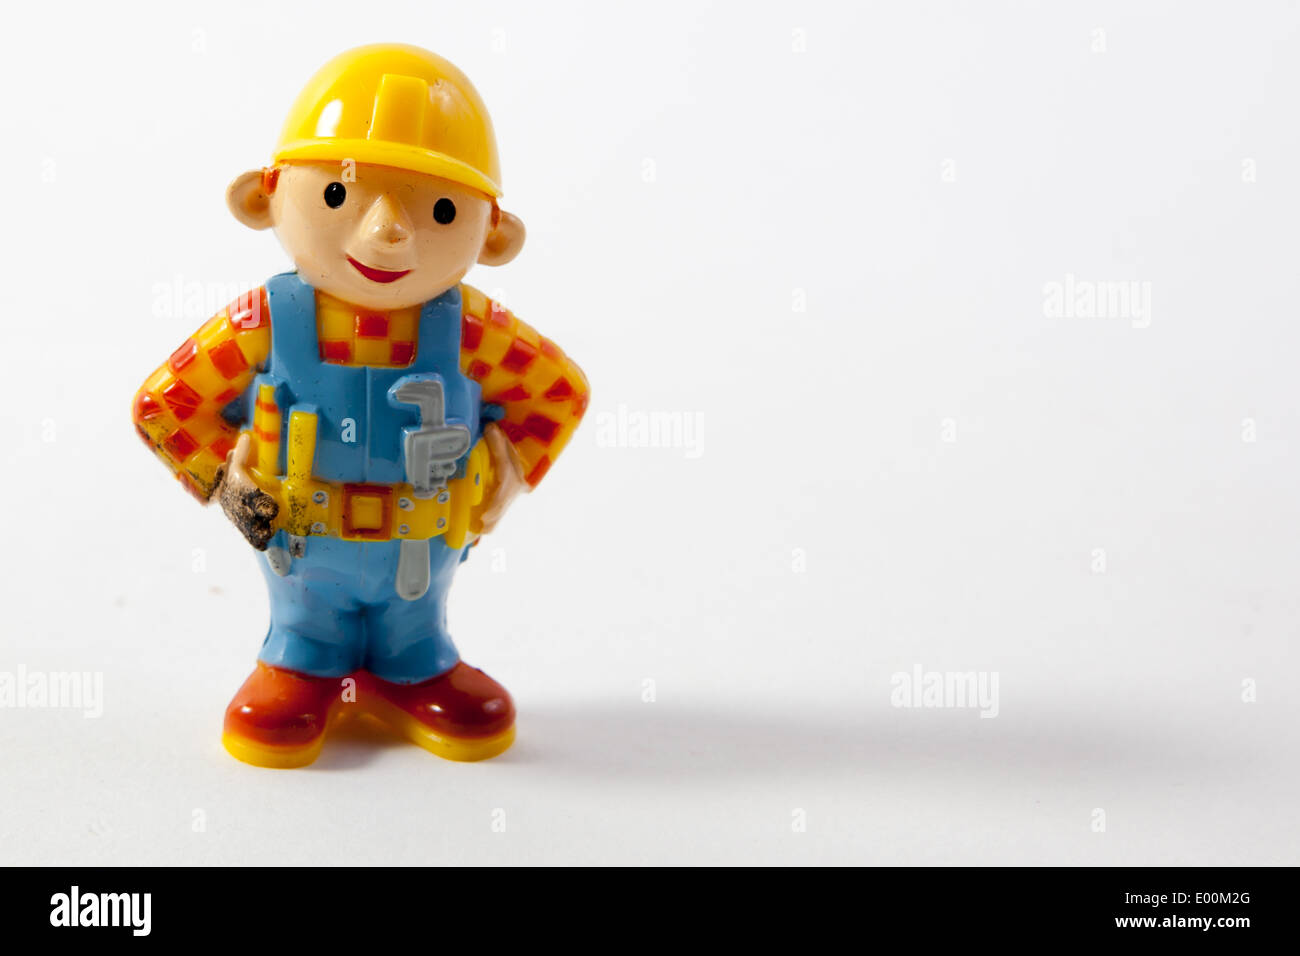 Builder Cut Out High Resolution Stock Photography and Images - Alamy